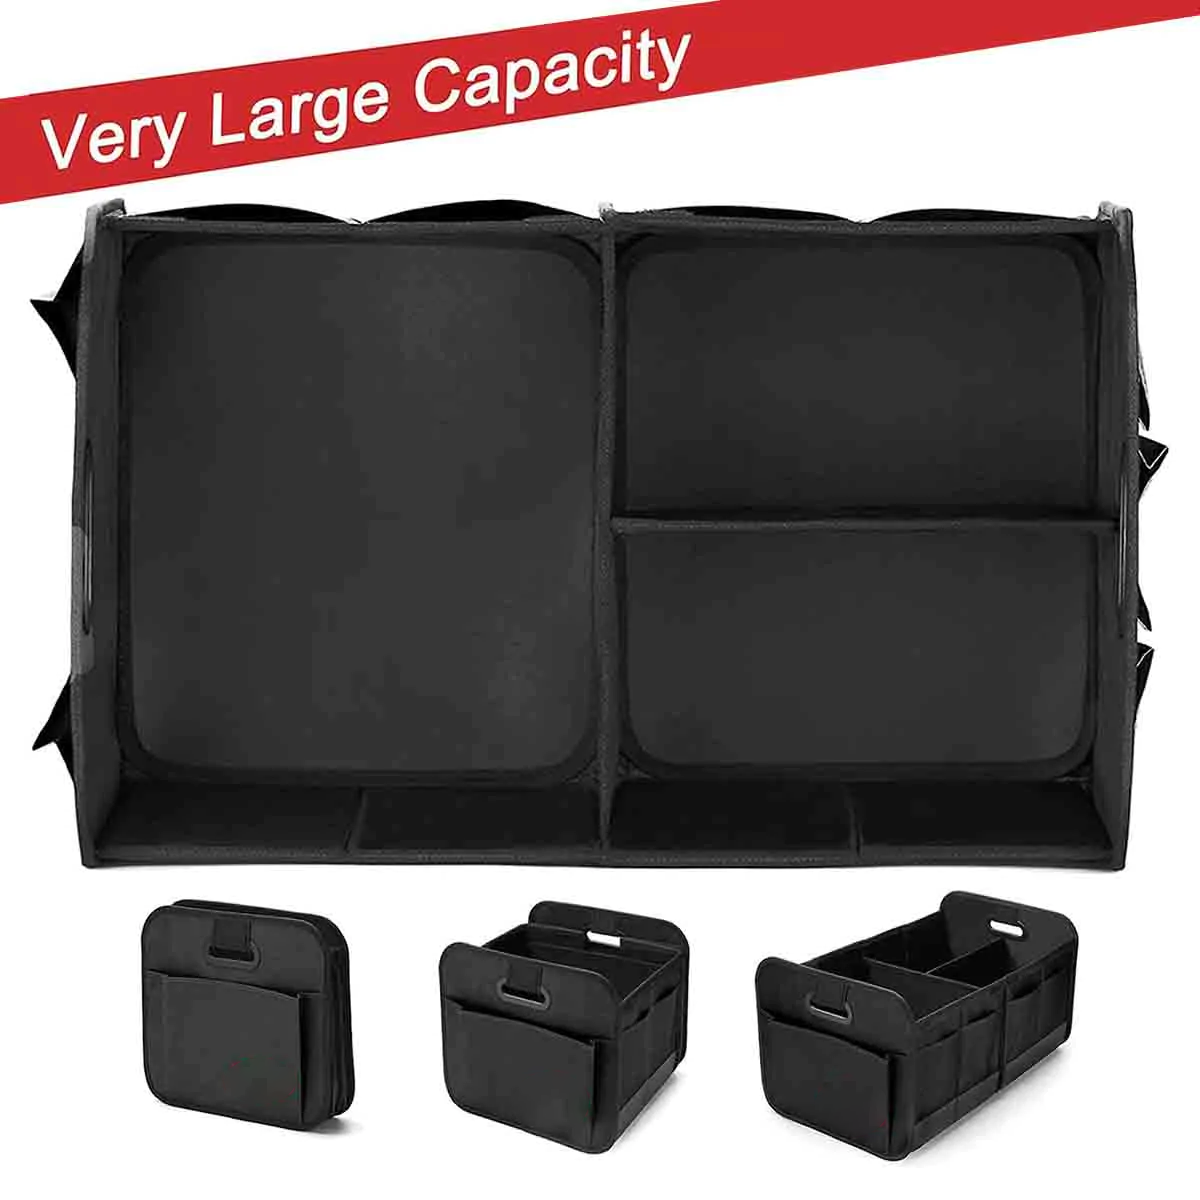 Custom Text For Car Trunk Organizer Storage, Compatible with All Cars, Reinforced Handles, Collapsible Multi, Compartment Car Organizers, Foldable and Waterproof, 600D Oxford Polyester MB12995